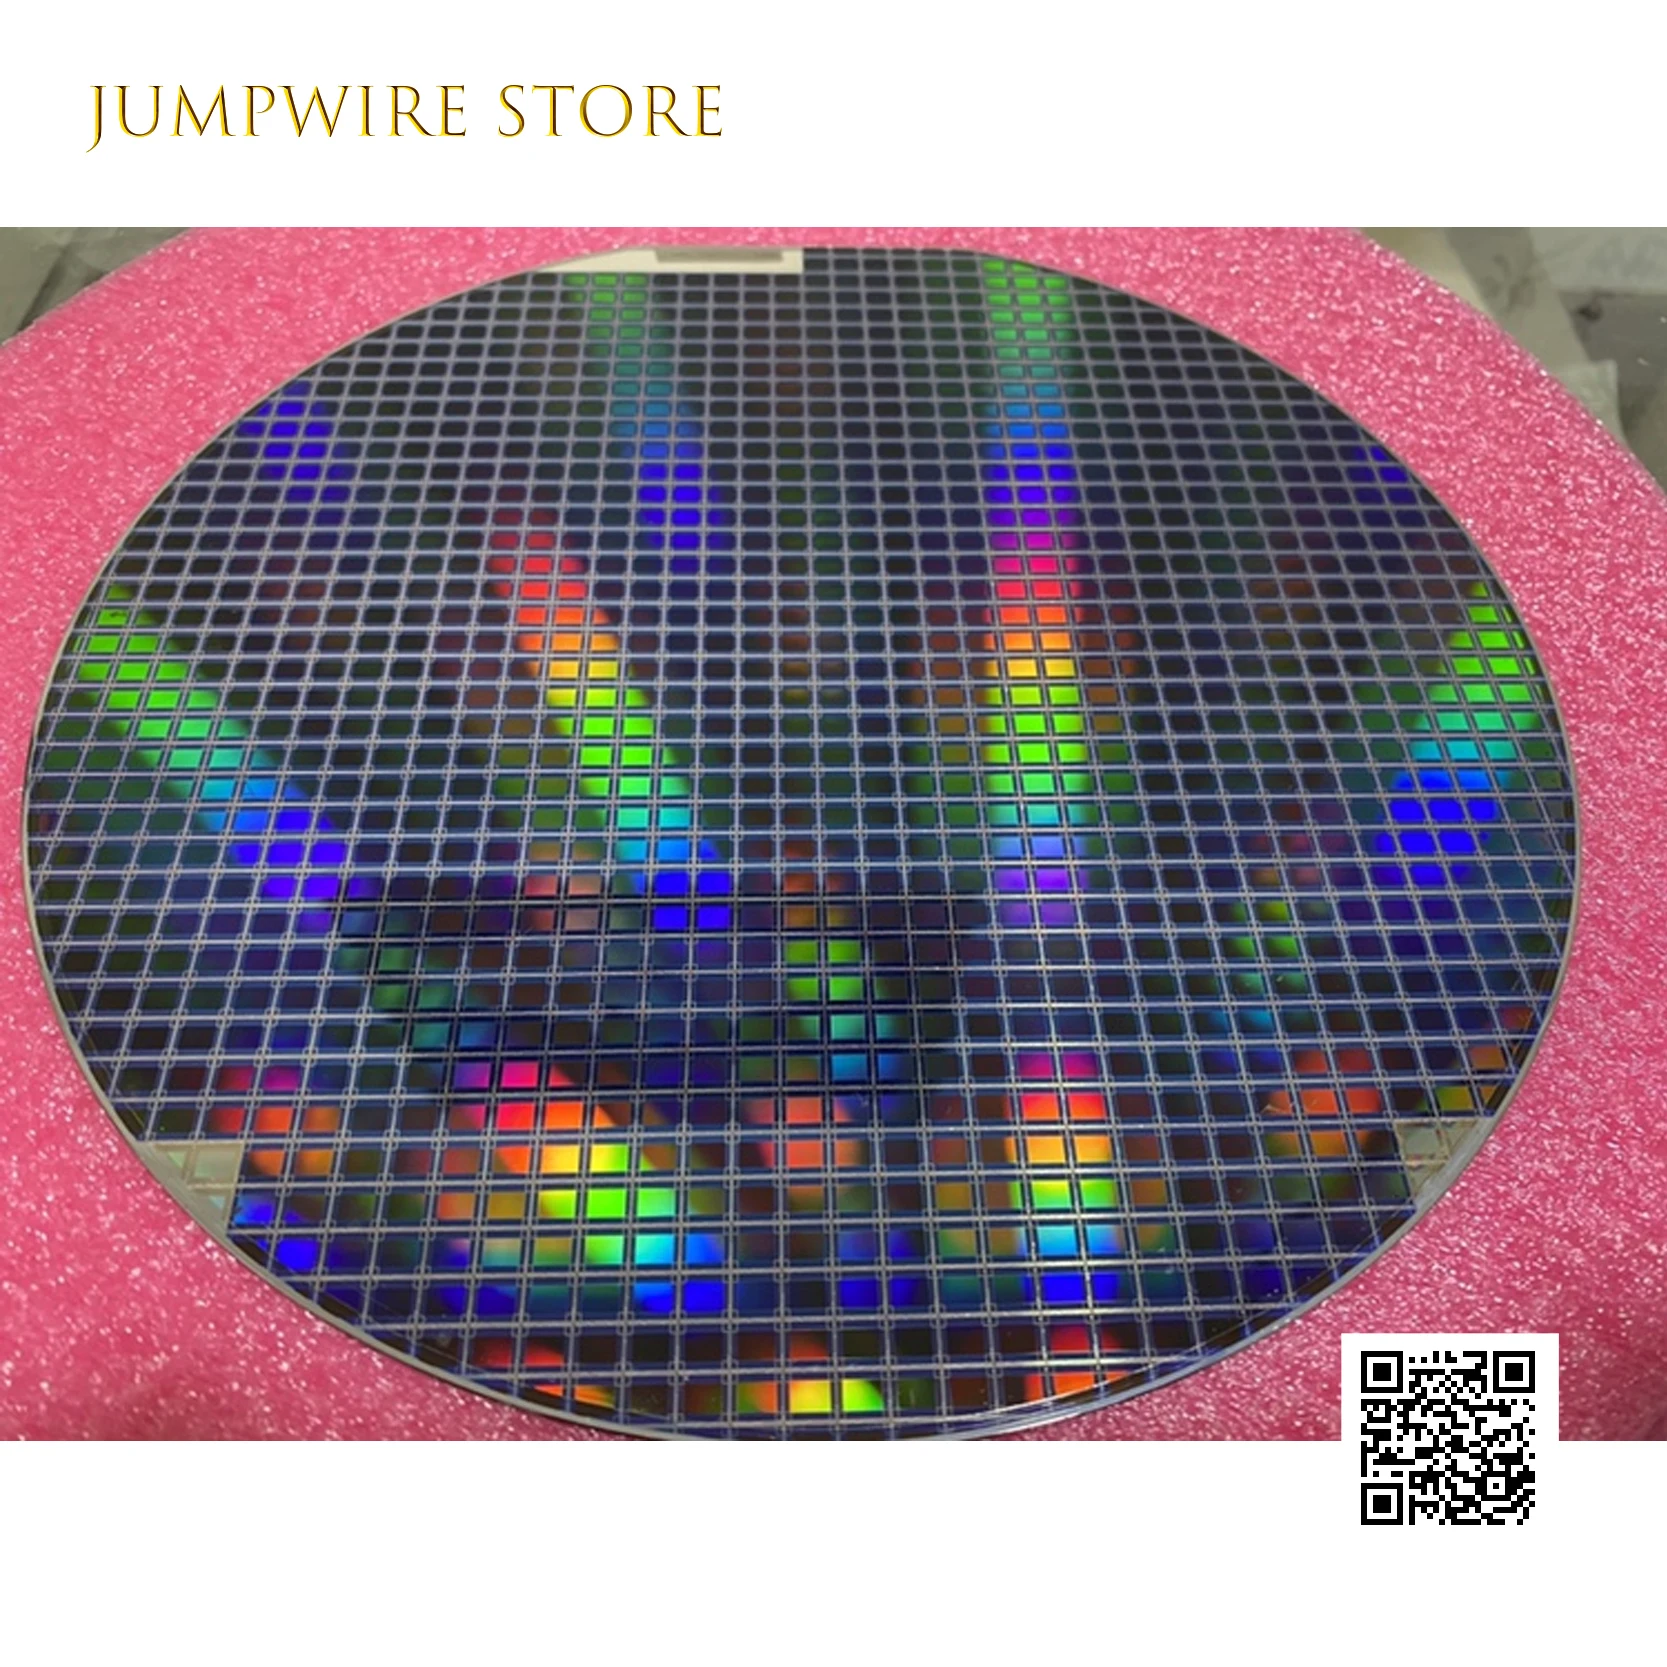 Support CPU Chip Wafer Cool Techs Decorative Gift Semiconductor Photoetching 